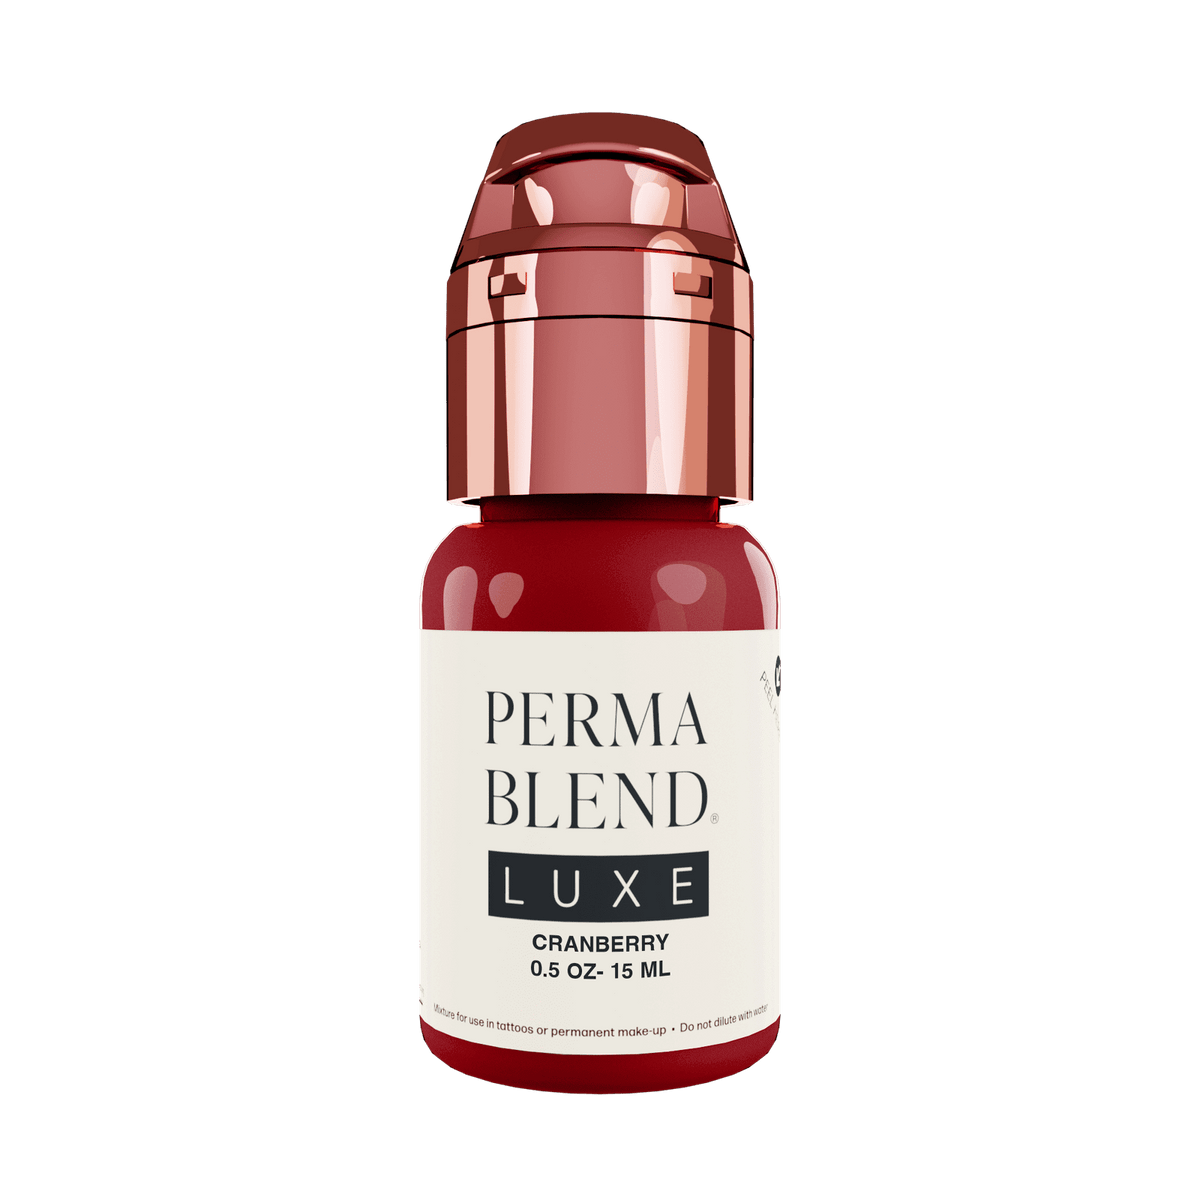 Perma Blend Luxe Cranberry